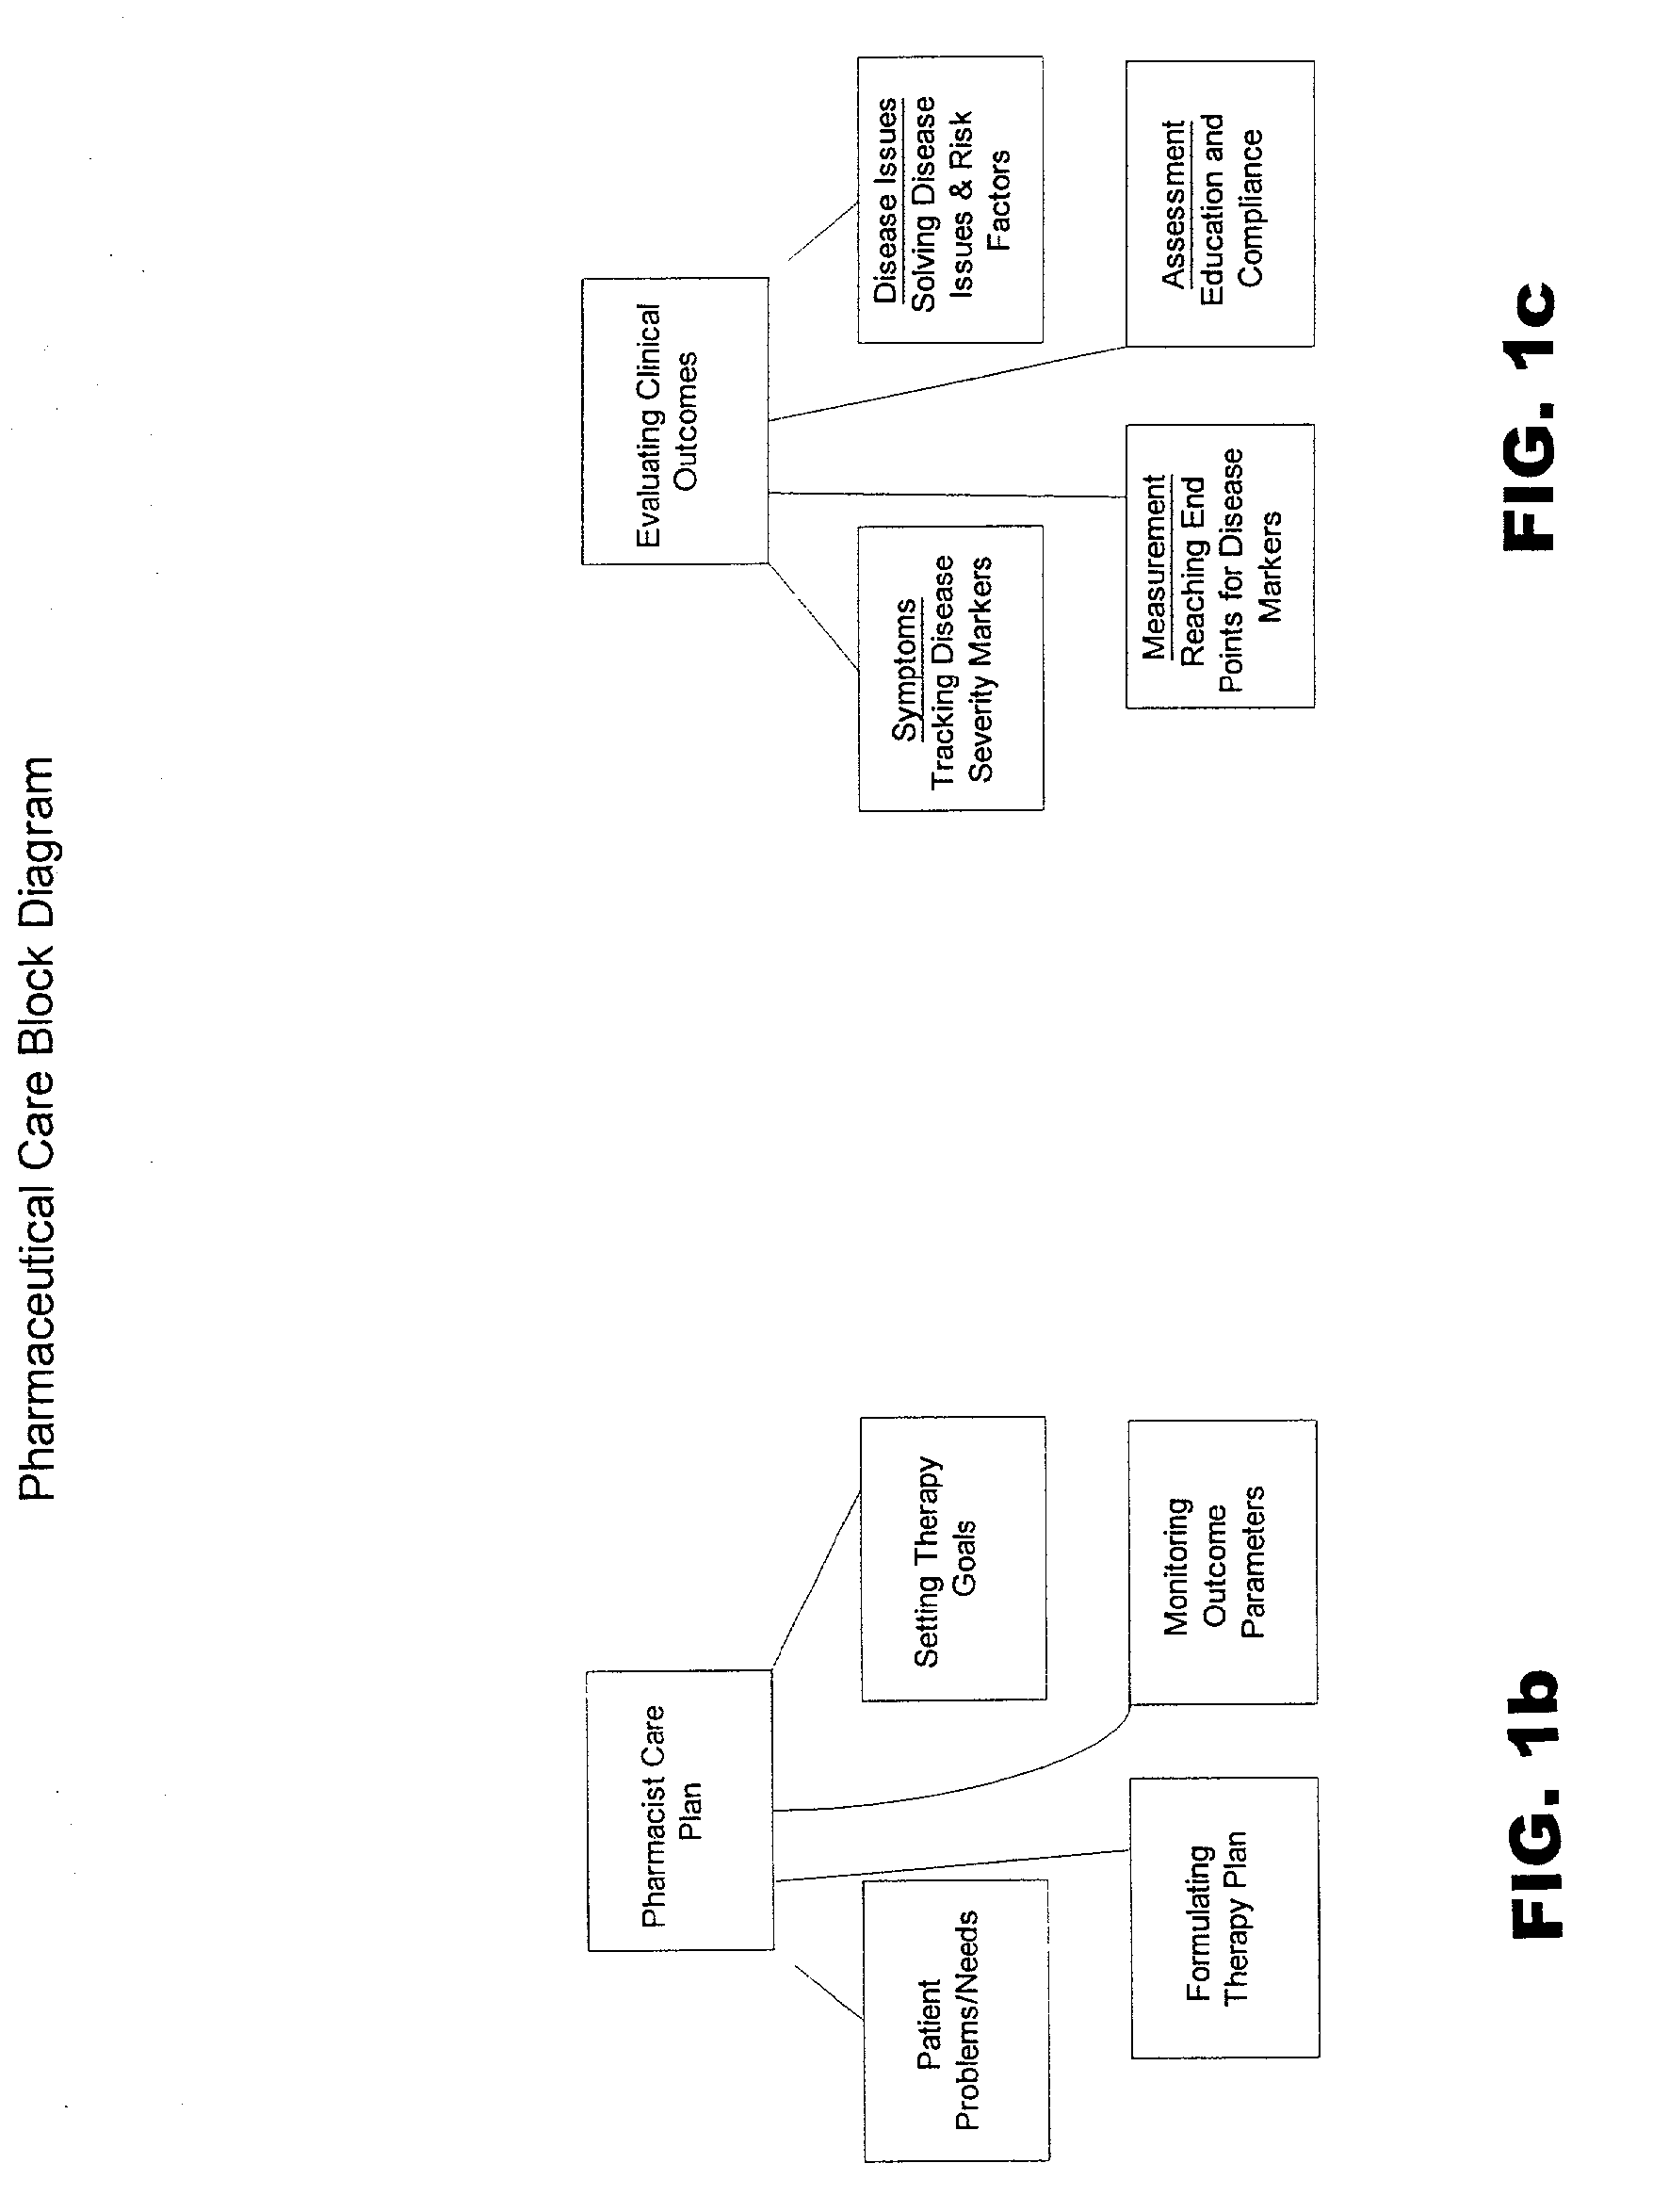 Systems and methods for managing patient pharmaceutical care